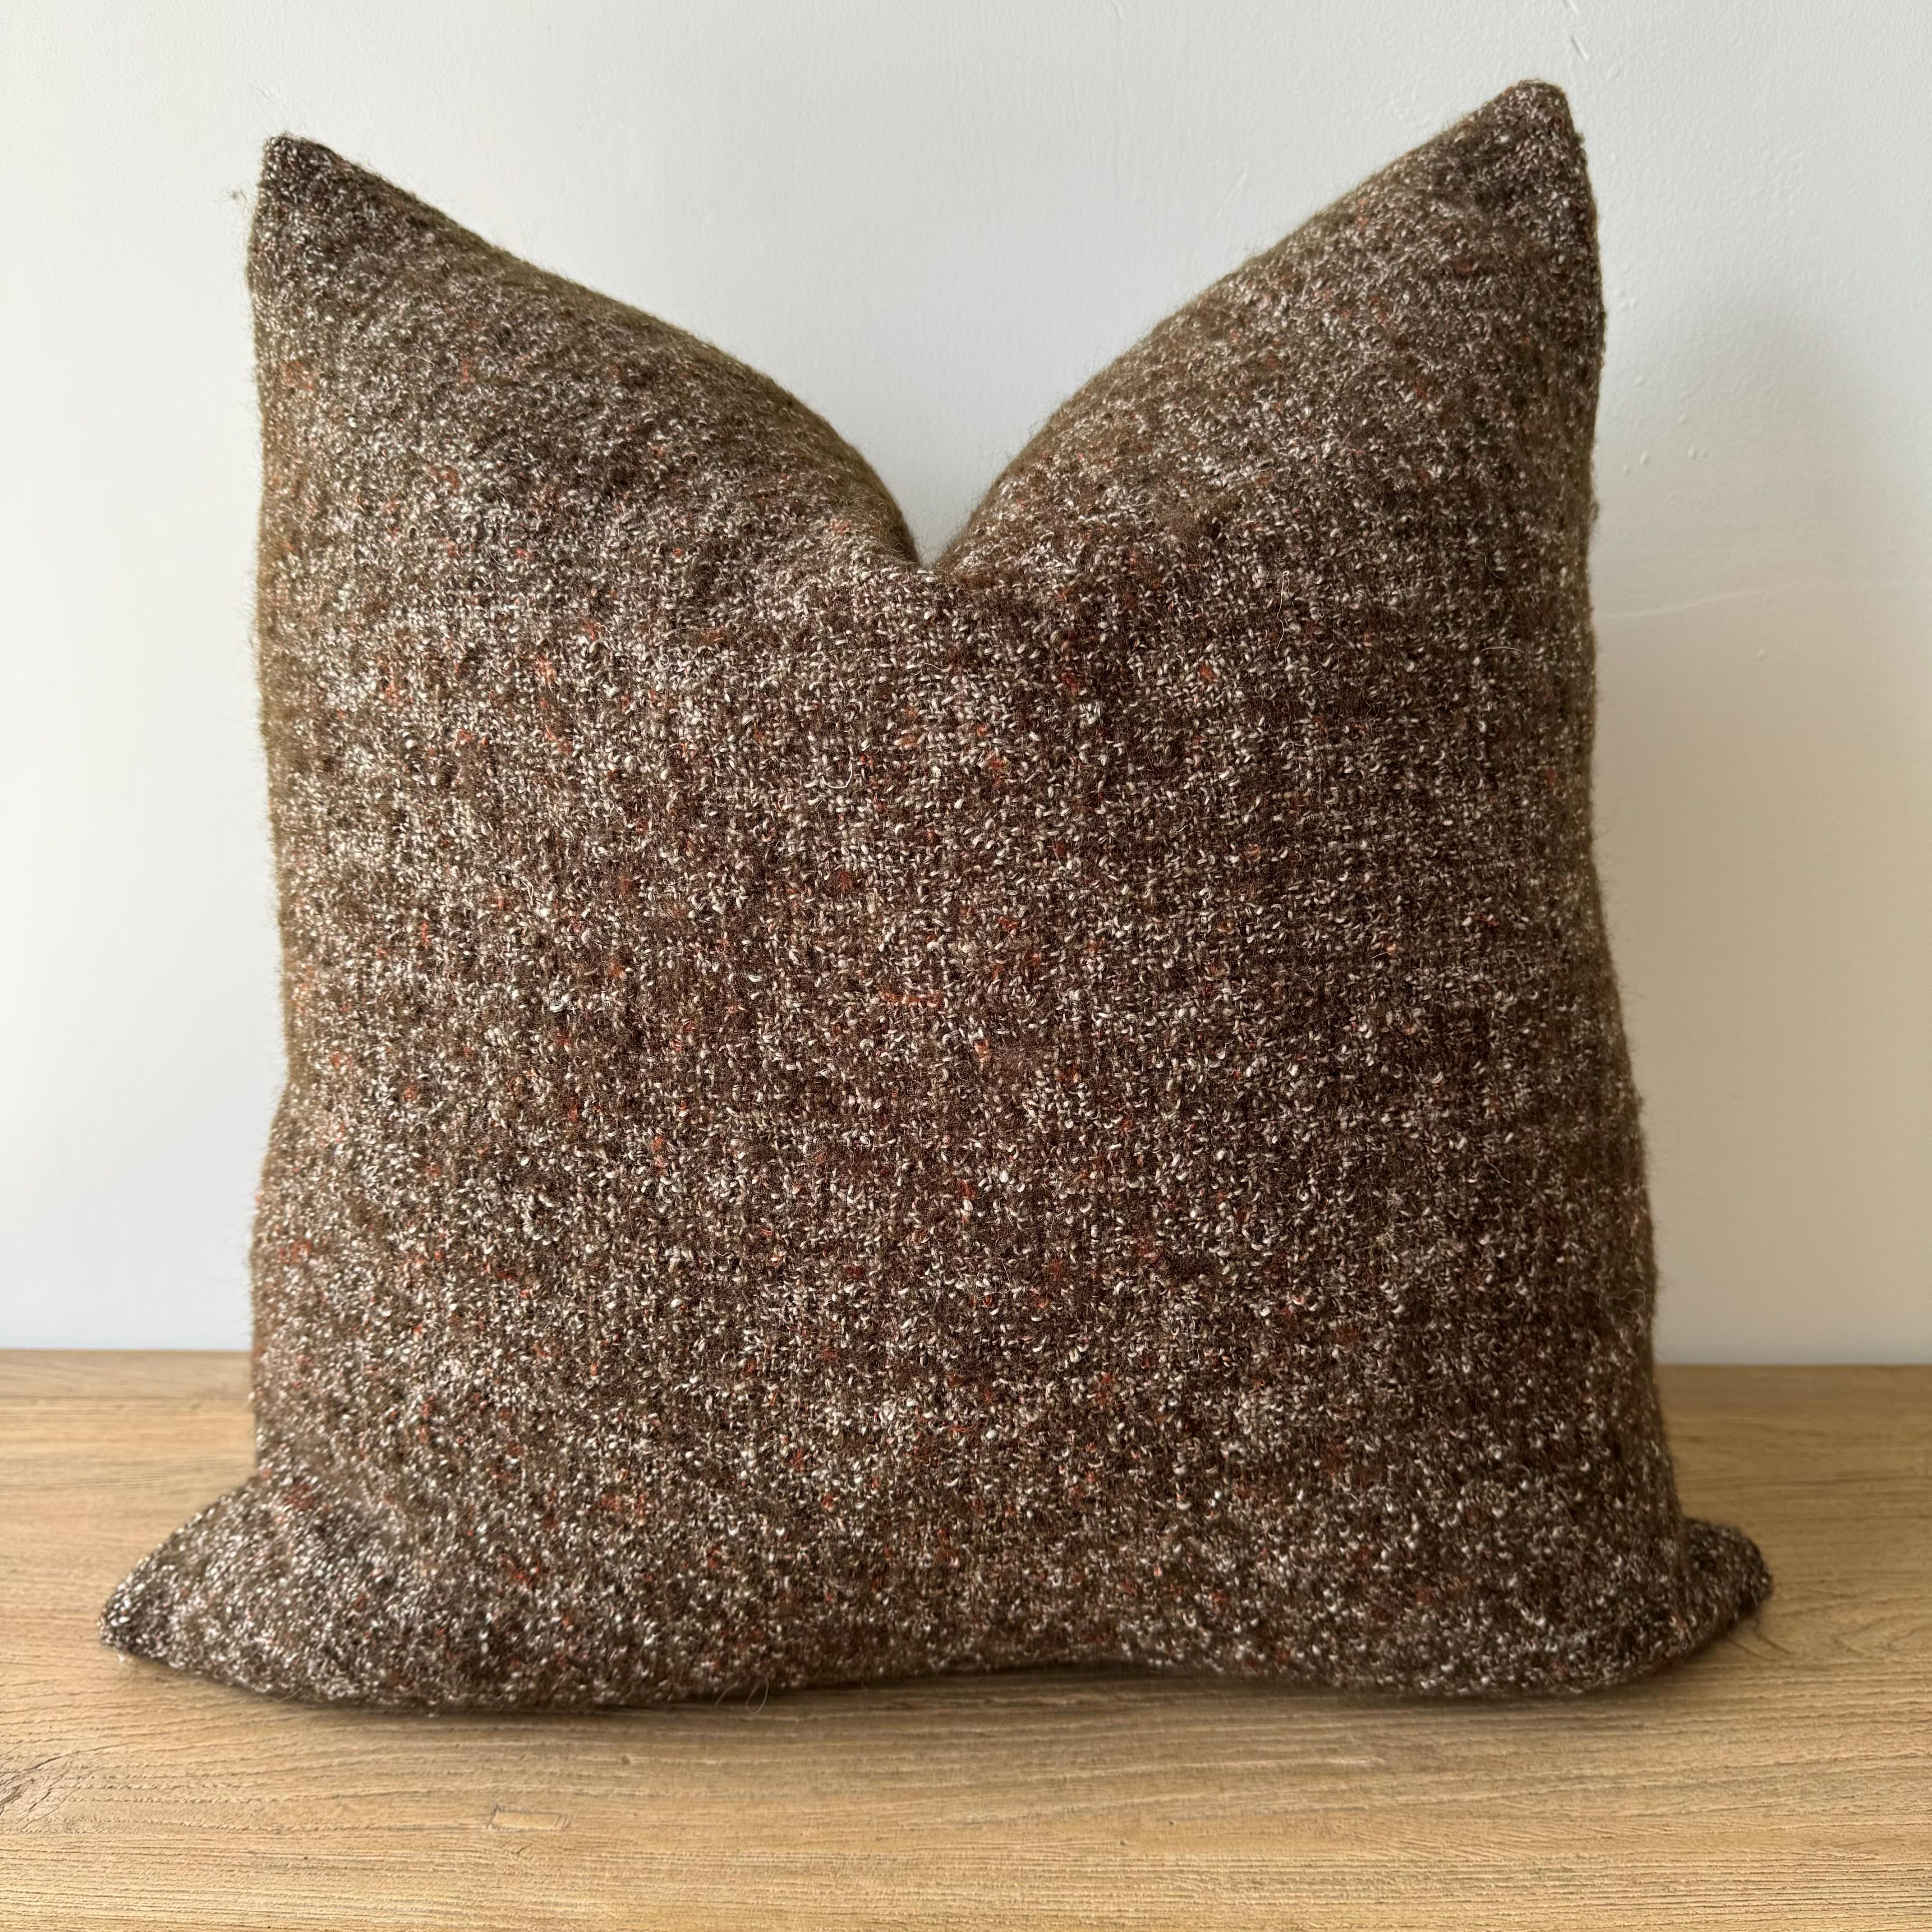 A Rich coco brown rust and natural flax oatmeal woven fibers in a stonewash finish create this luxurious soft pillow. Sewn with an antique brass zipper closure and overlocked edges.
Includes a down/ feather insert.
Size: 22 x 22
-51% Linen
-39%